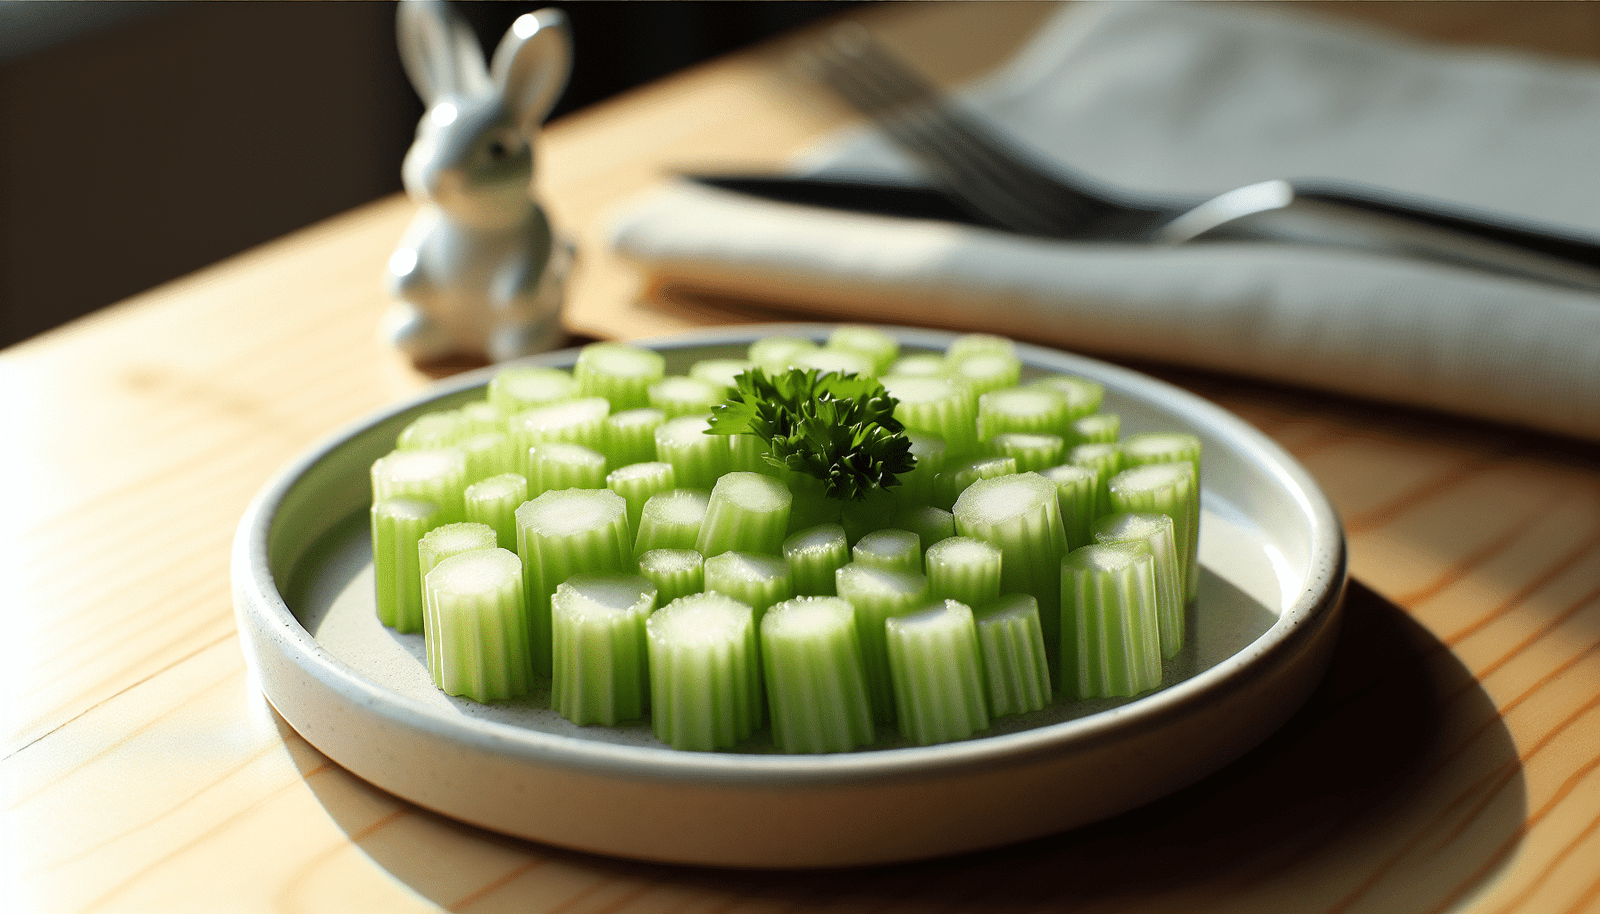 Small pieces of celery arranged on a plate